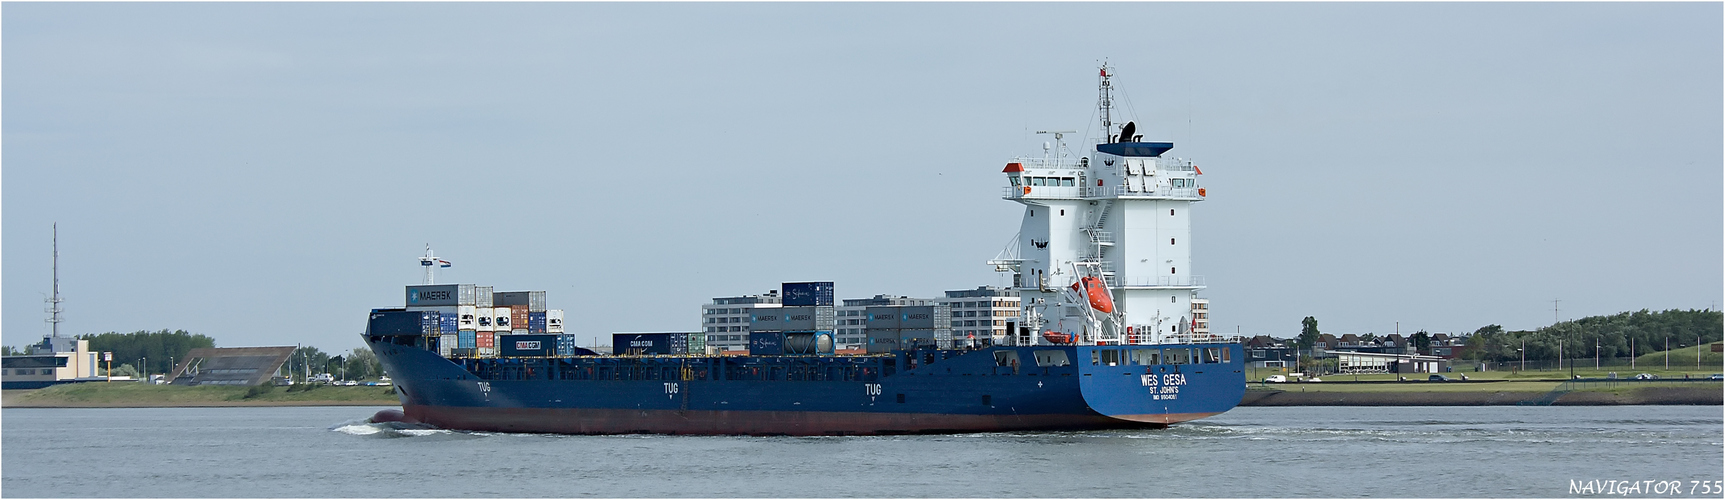 WES GESA / Container ship